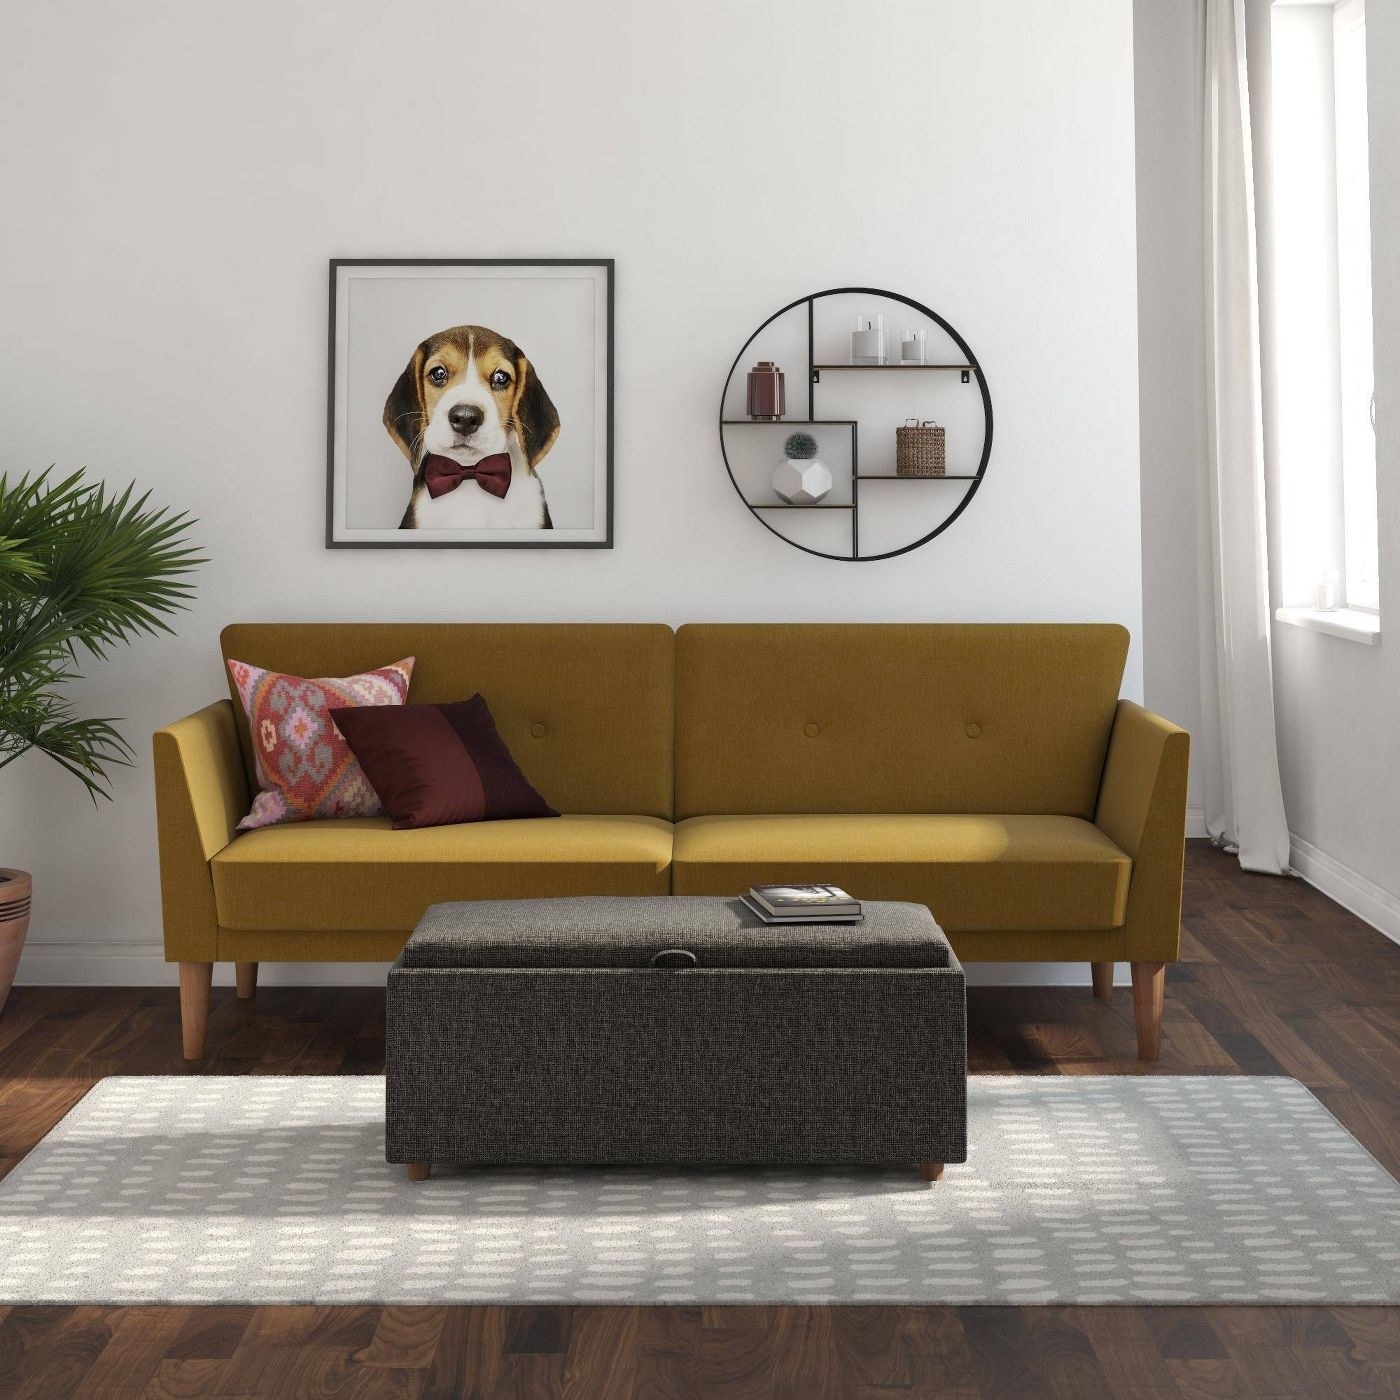 mustard yellow regal sofa with red pillows